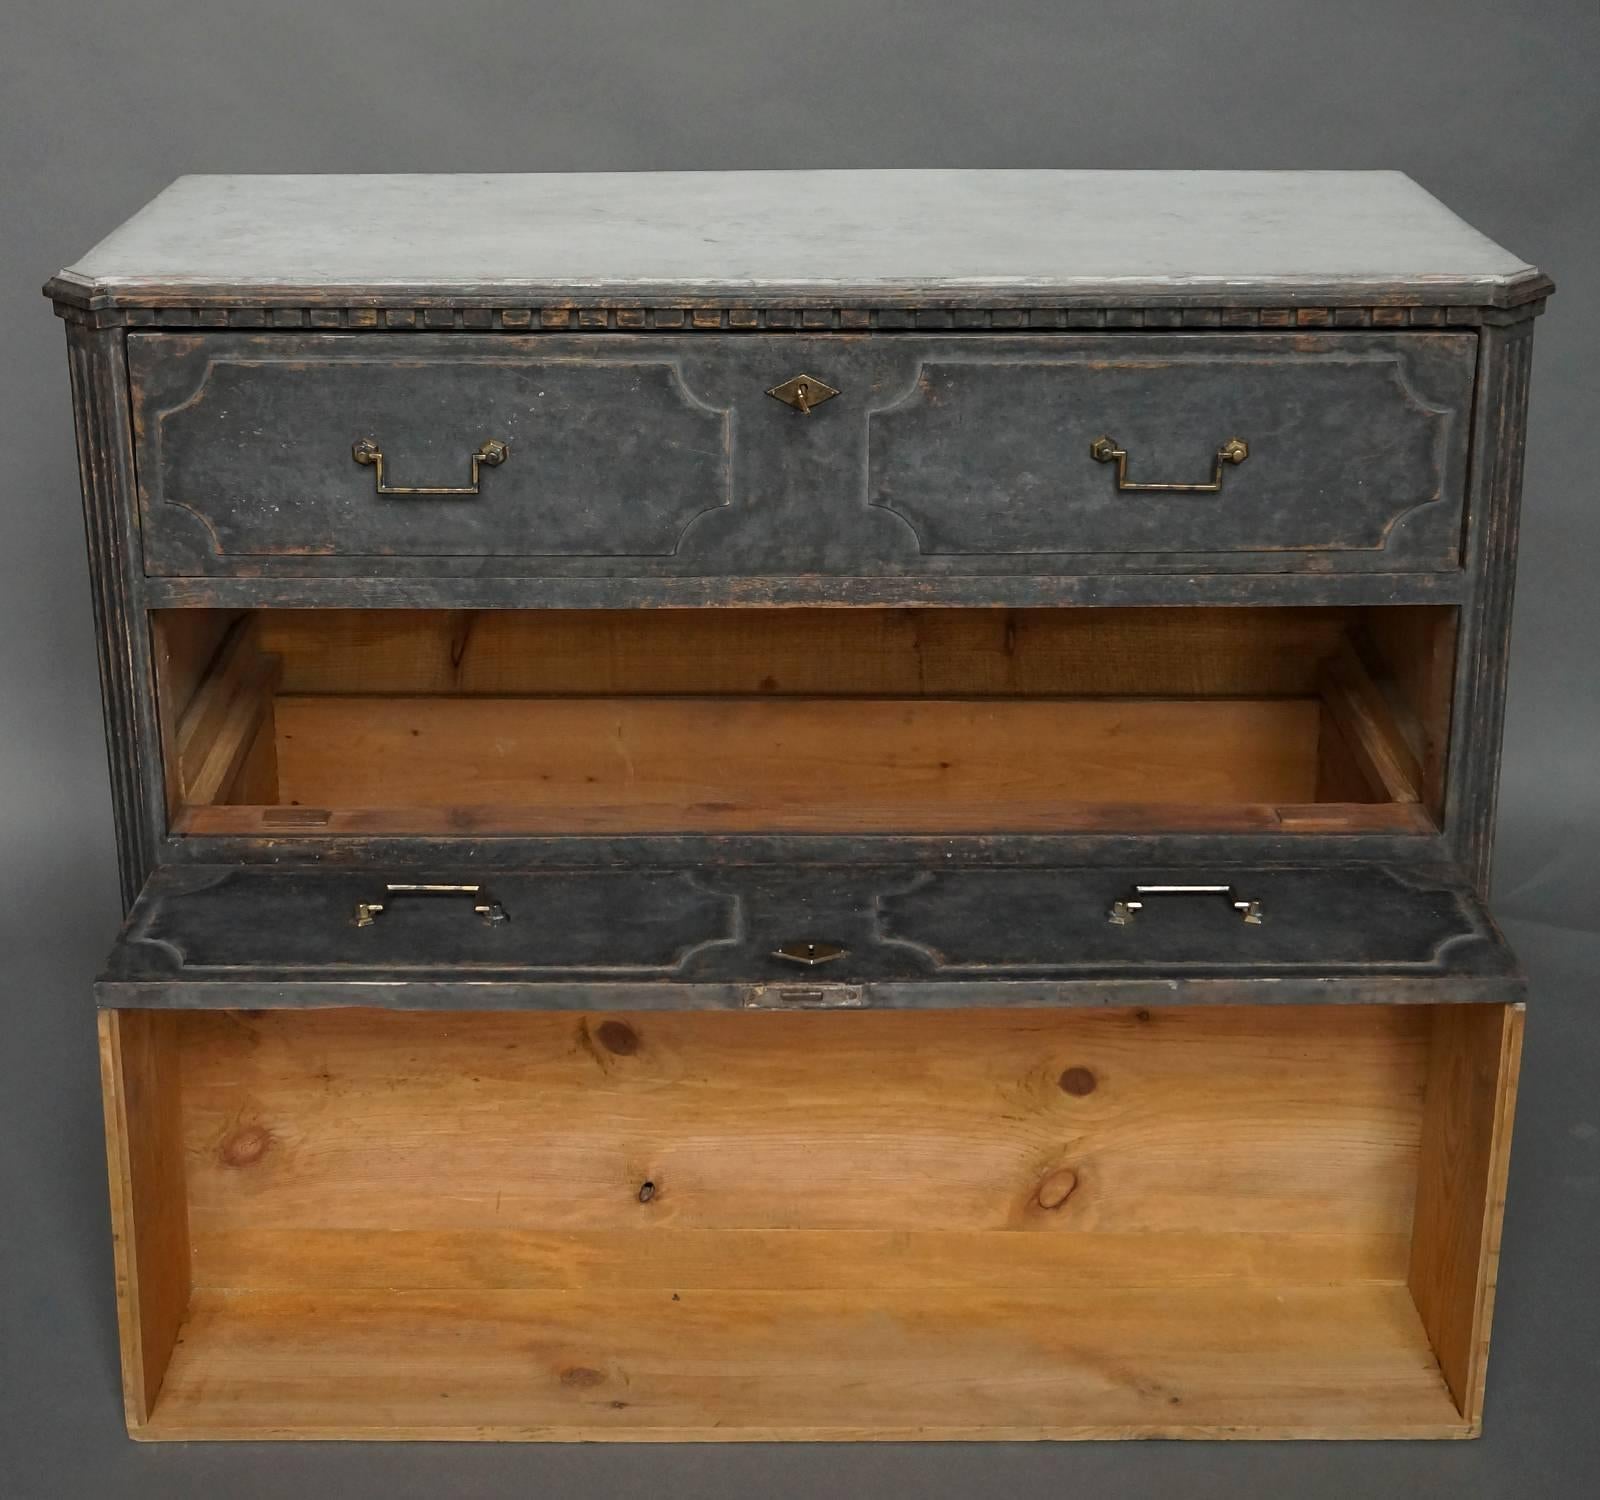 Swedish neoclassical chest of drawers, circa 1820. Each of the three drawers has a pair of raised panels, brass pulls, and a brass escutcheon. Worn black paint with a white top.